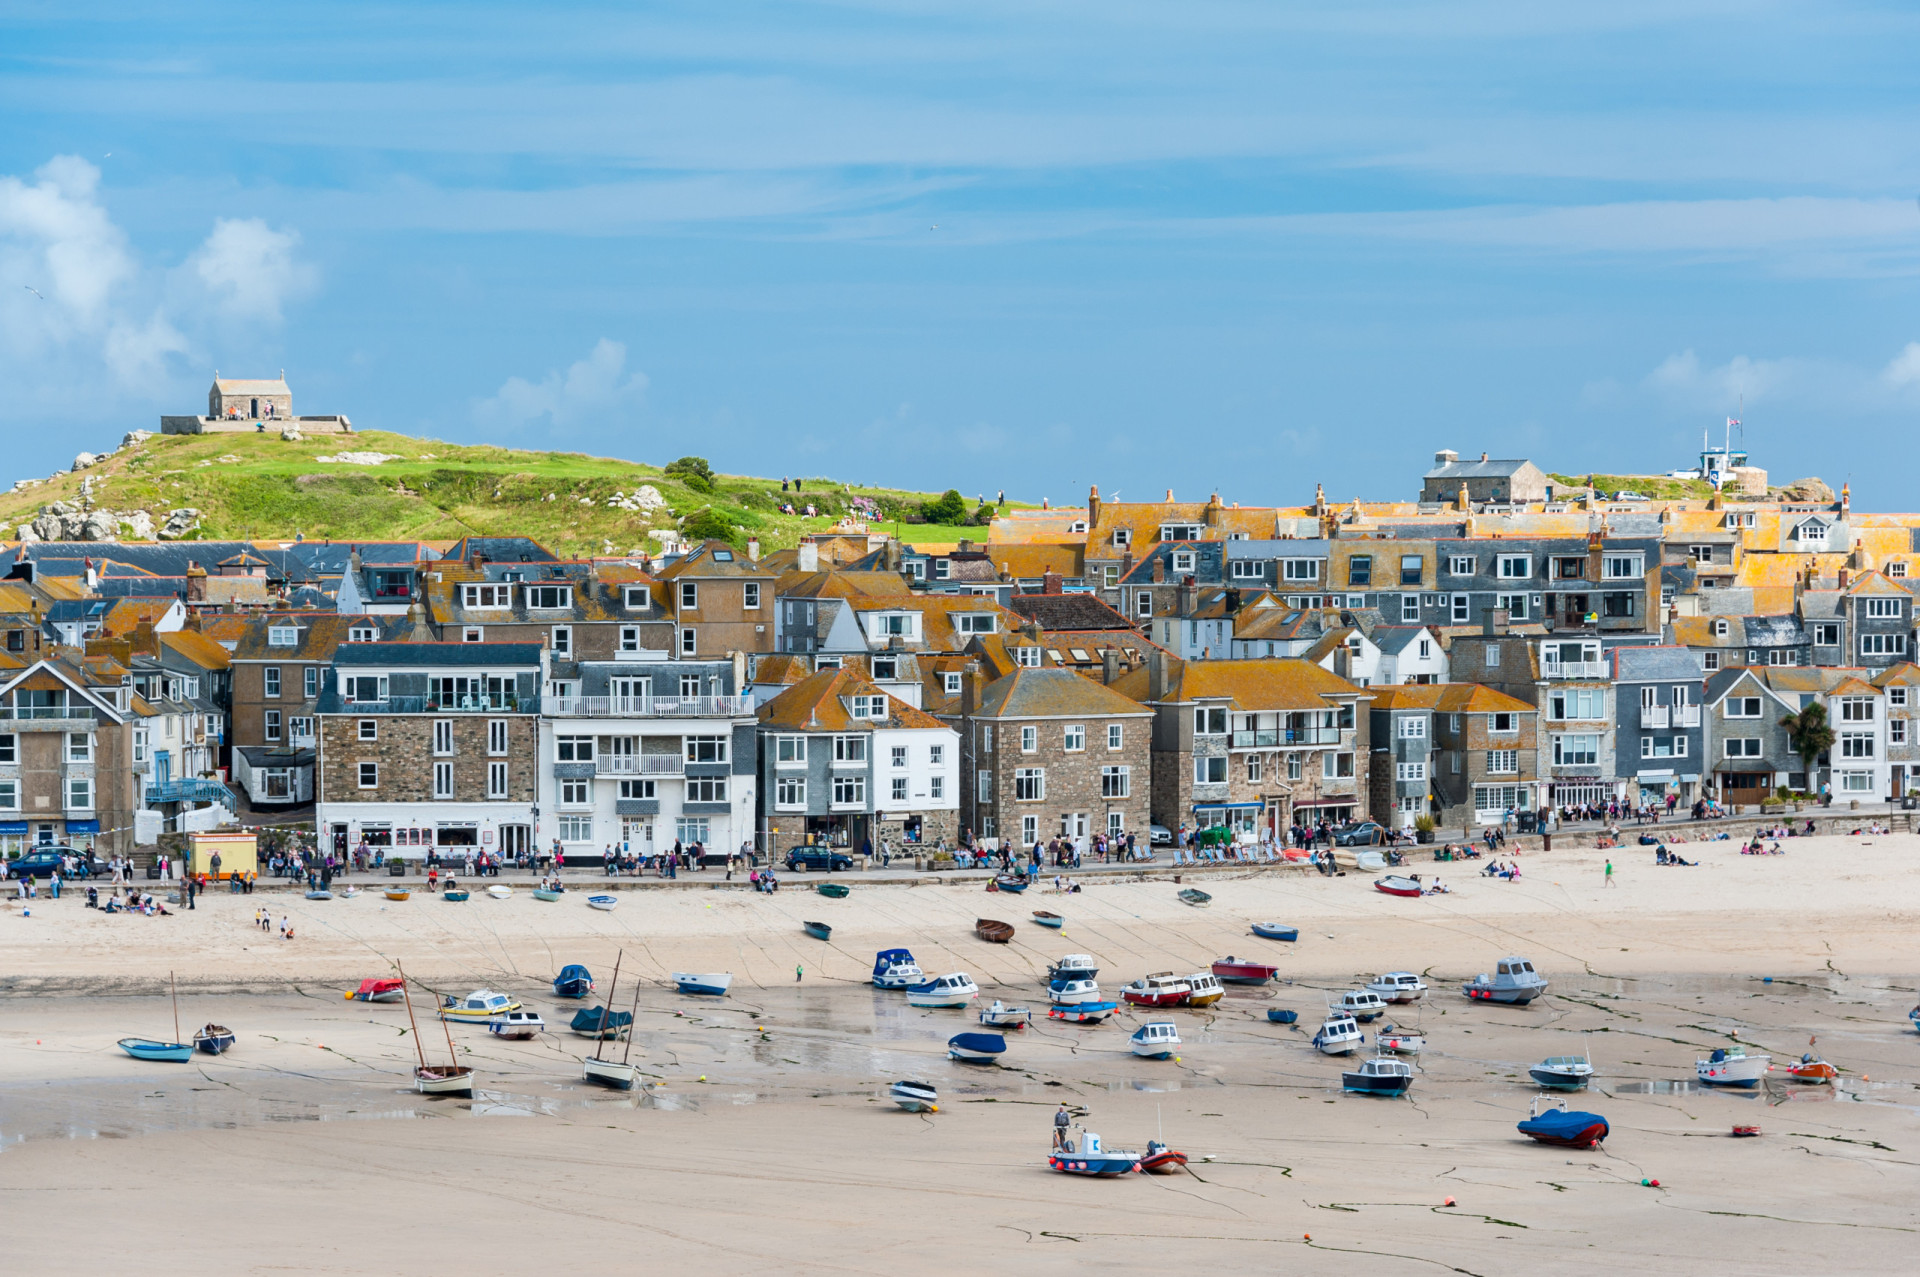 <p>You may think this is in the Bahamas, but it's actually St. Ives in Cornwall. This old fishing village is one of the best seaside towns in Britain owing to its wonderful shops and luxurious beaches.</p>